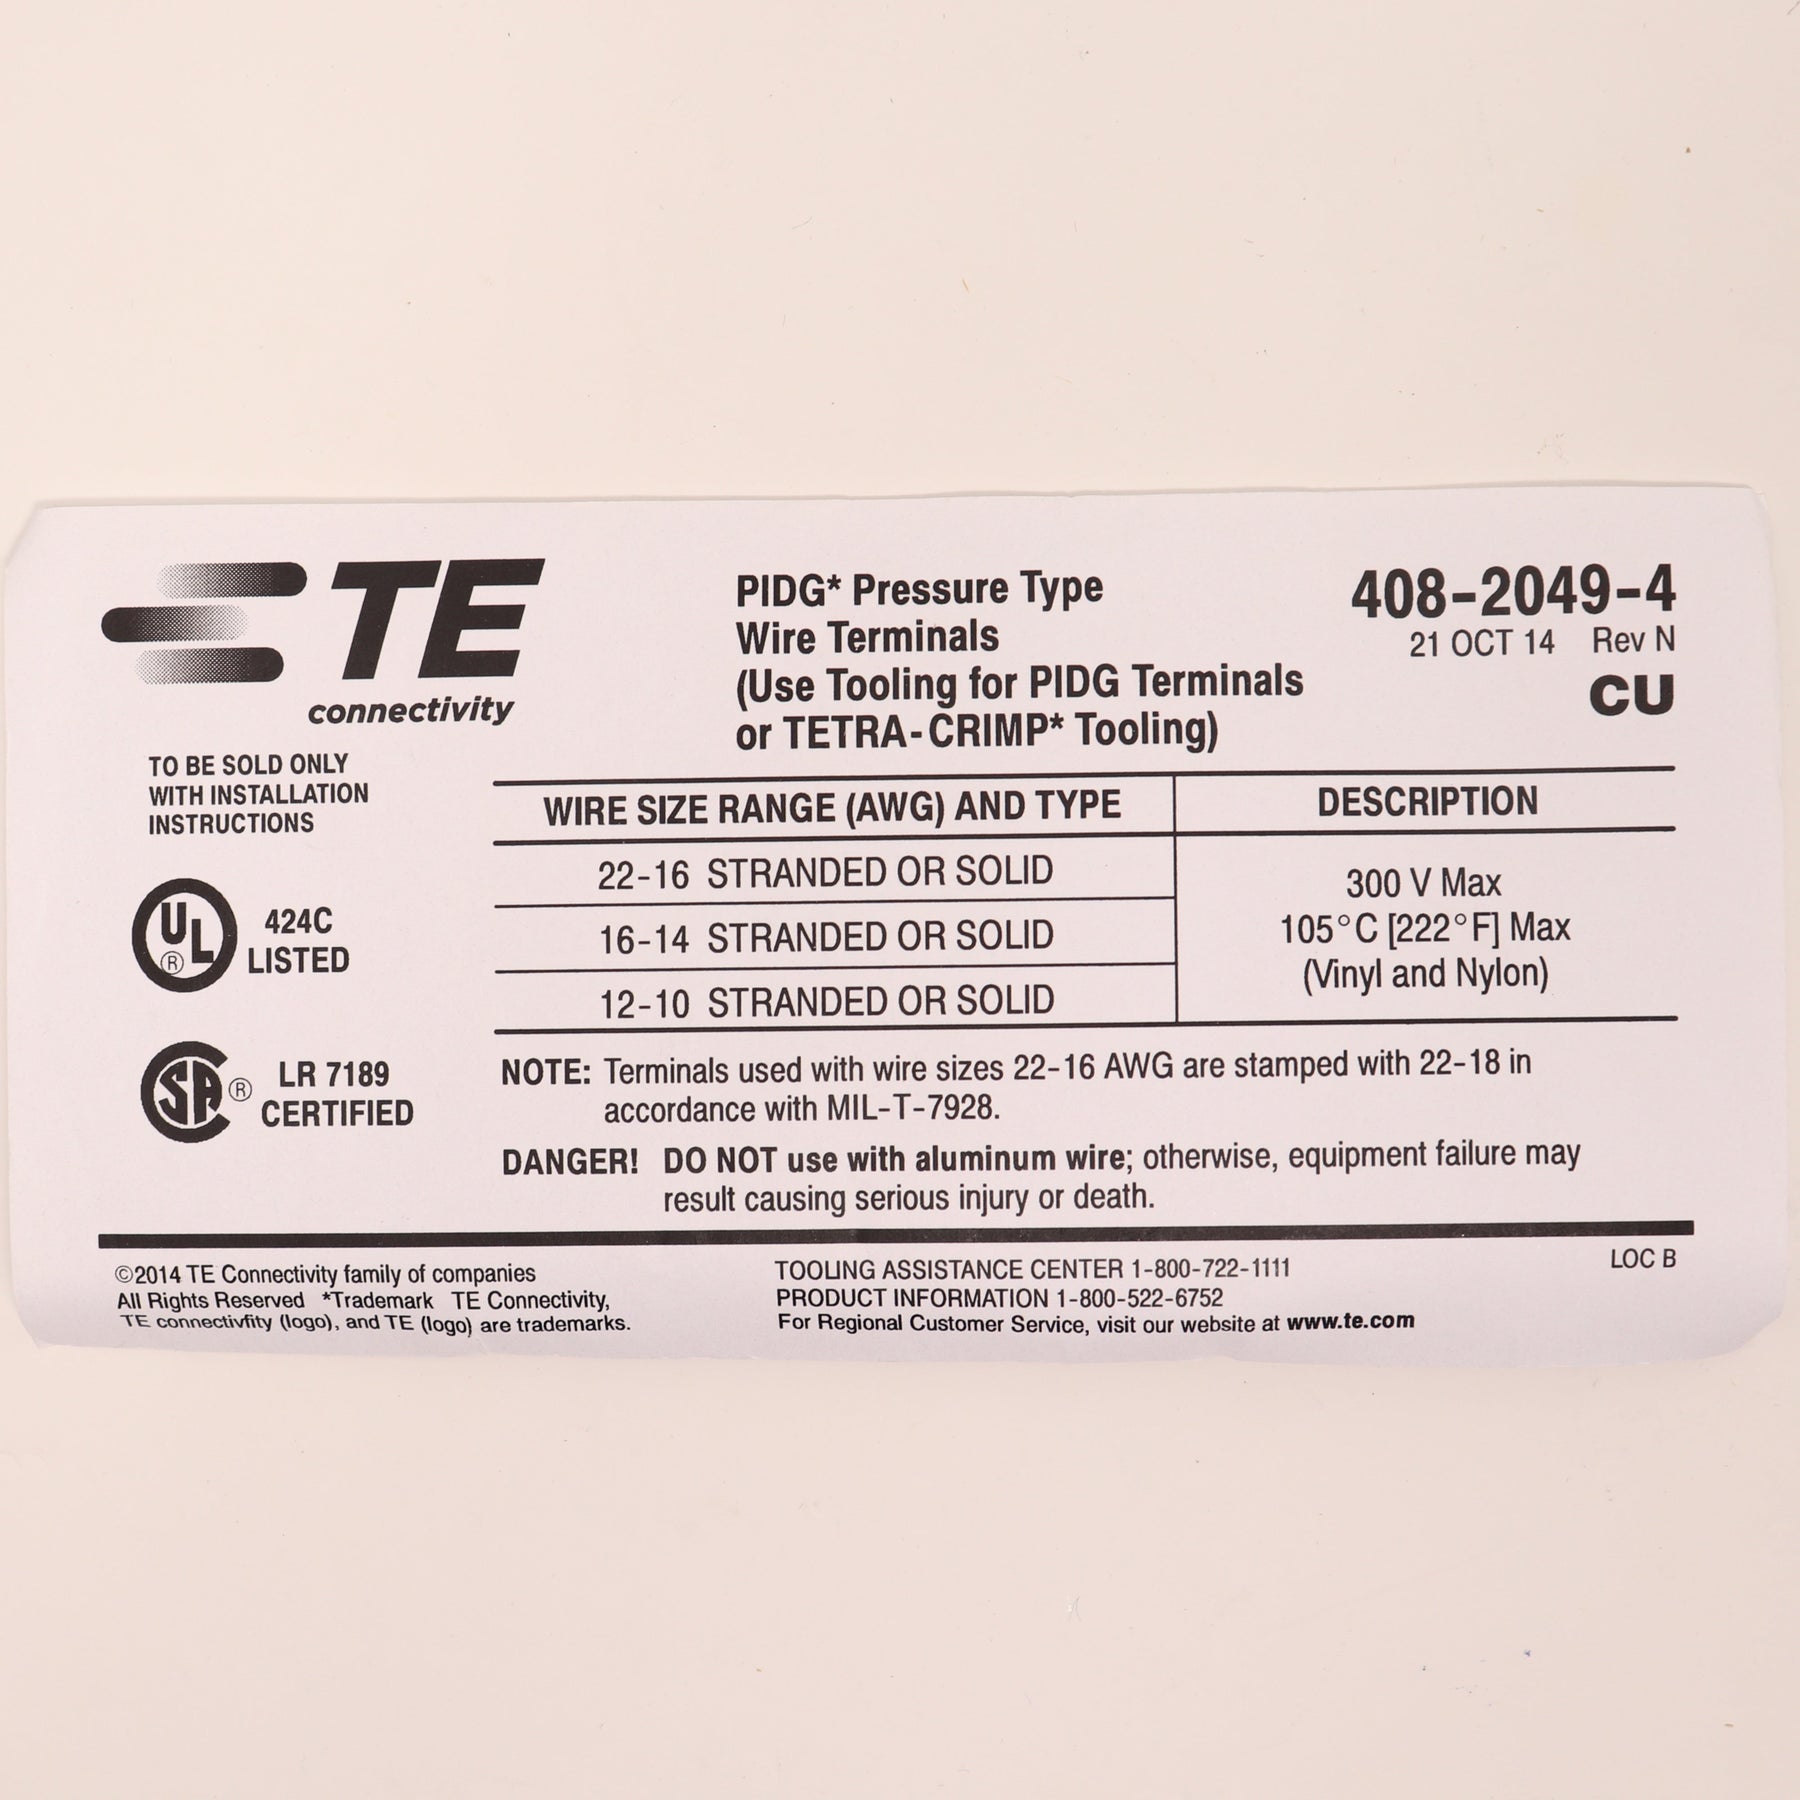 310 Pack TE Connectivity PIDG Ring Tongue Terminal, 10-10 AWG #8, MS25036-156